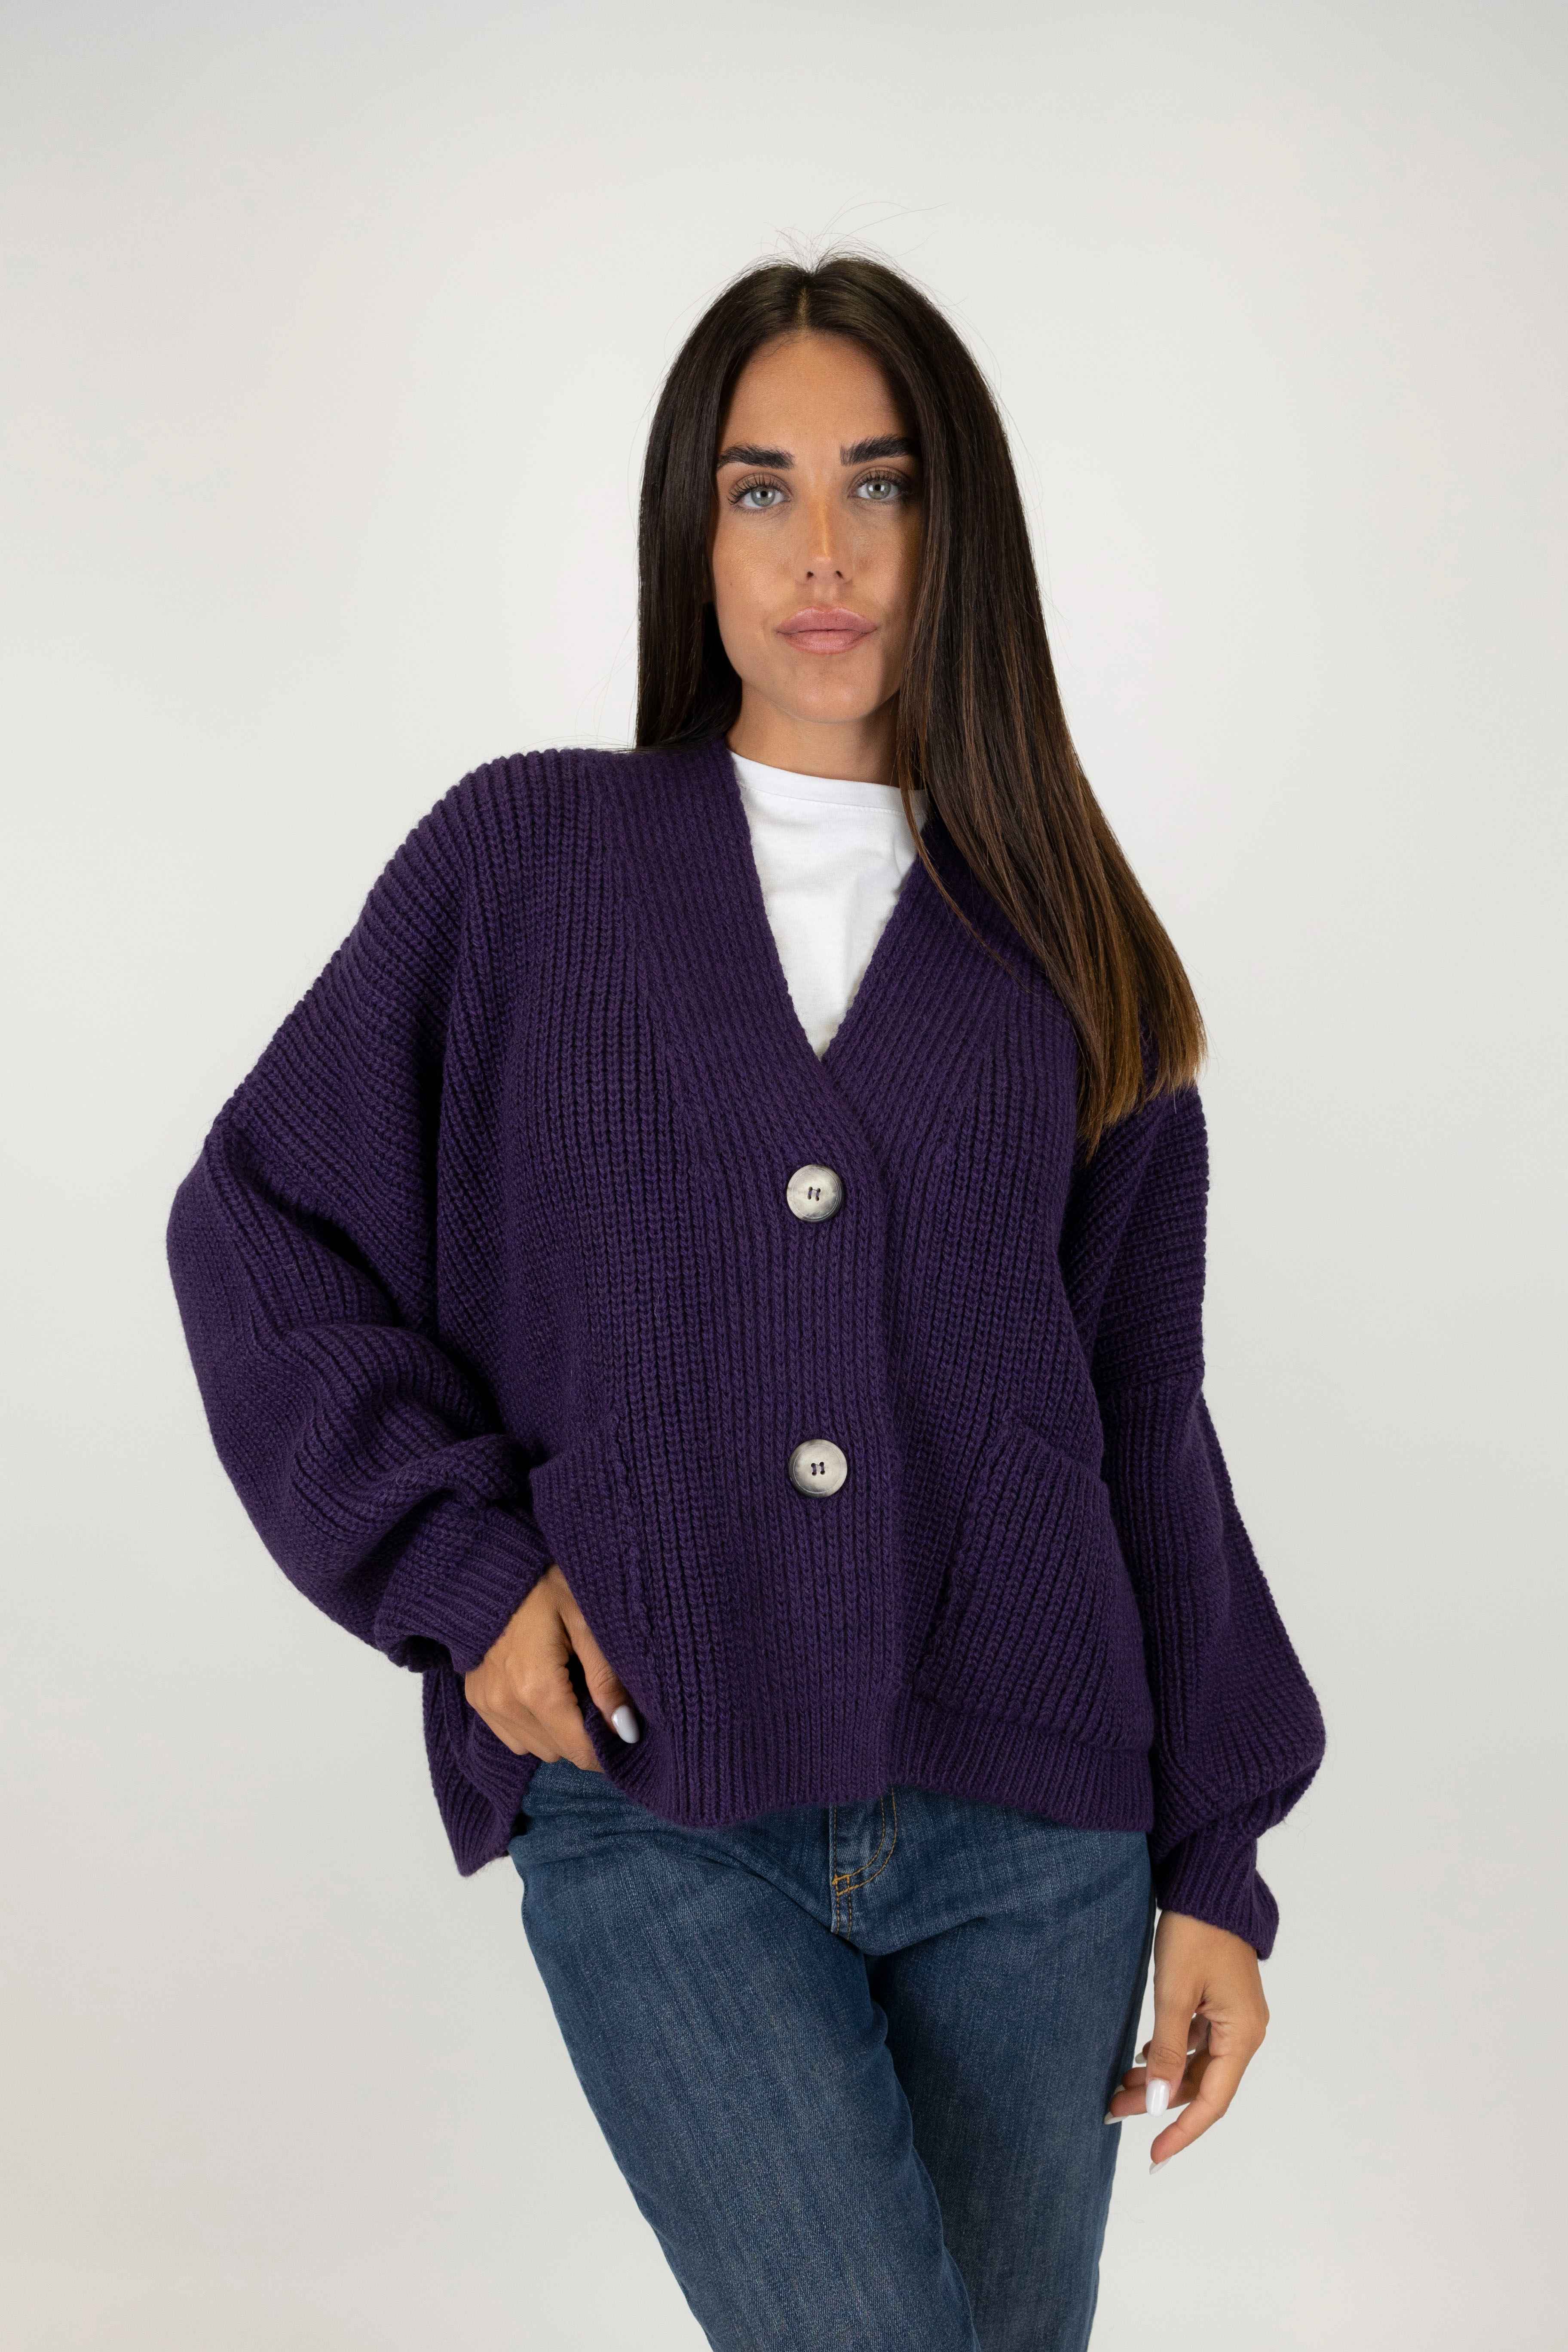 Tension in - Wool blend cardigan with button closure